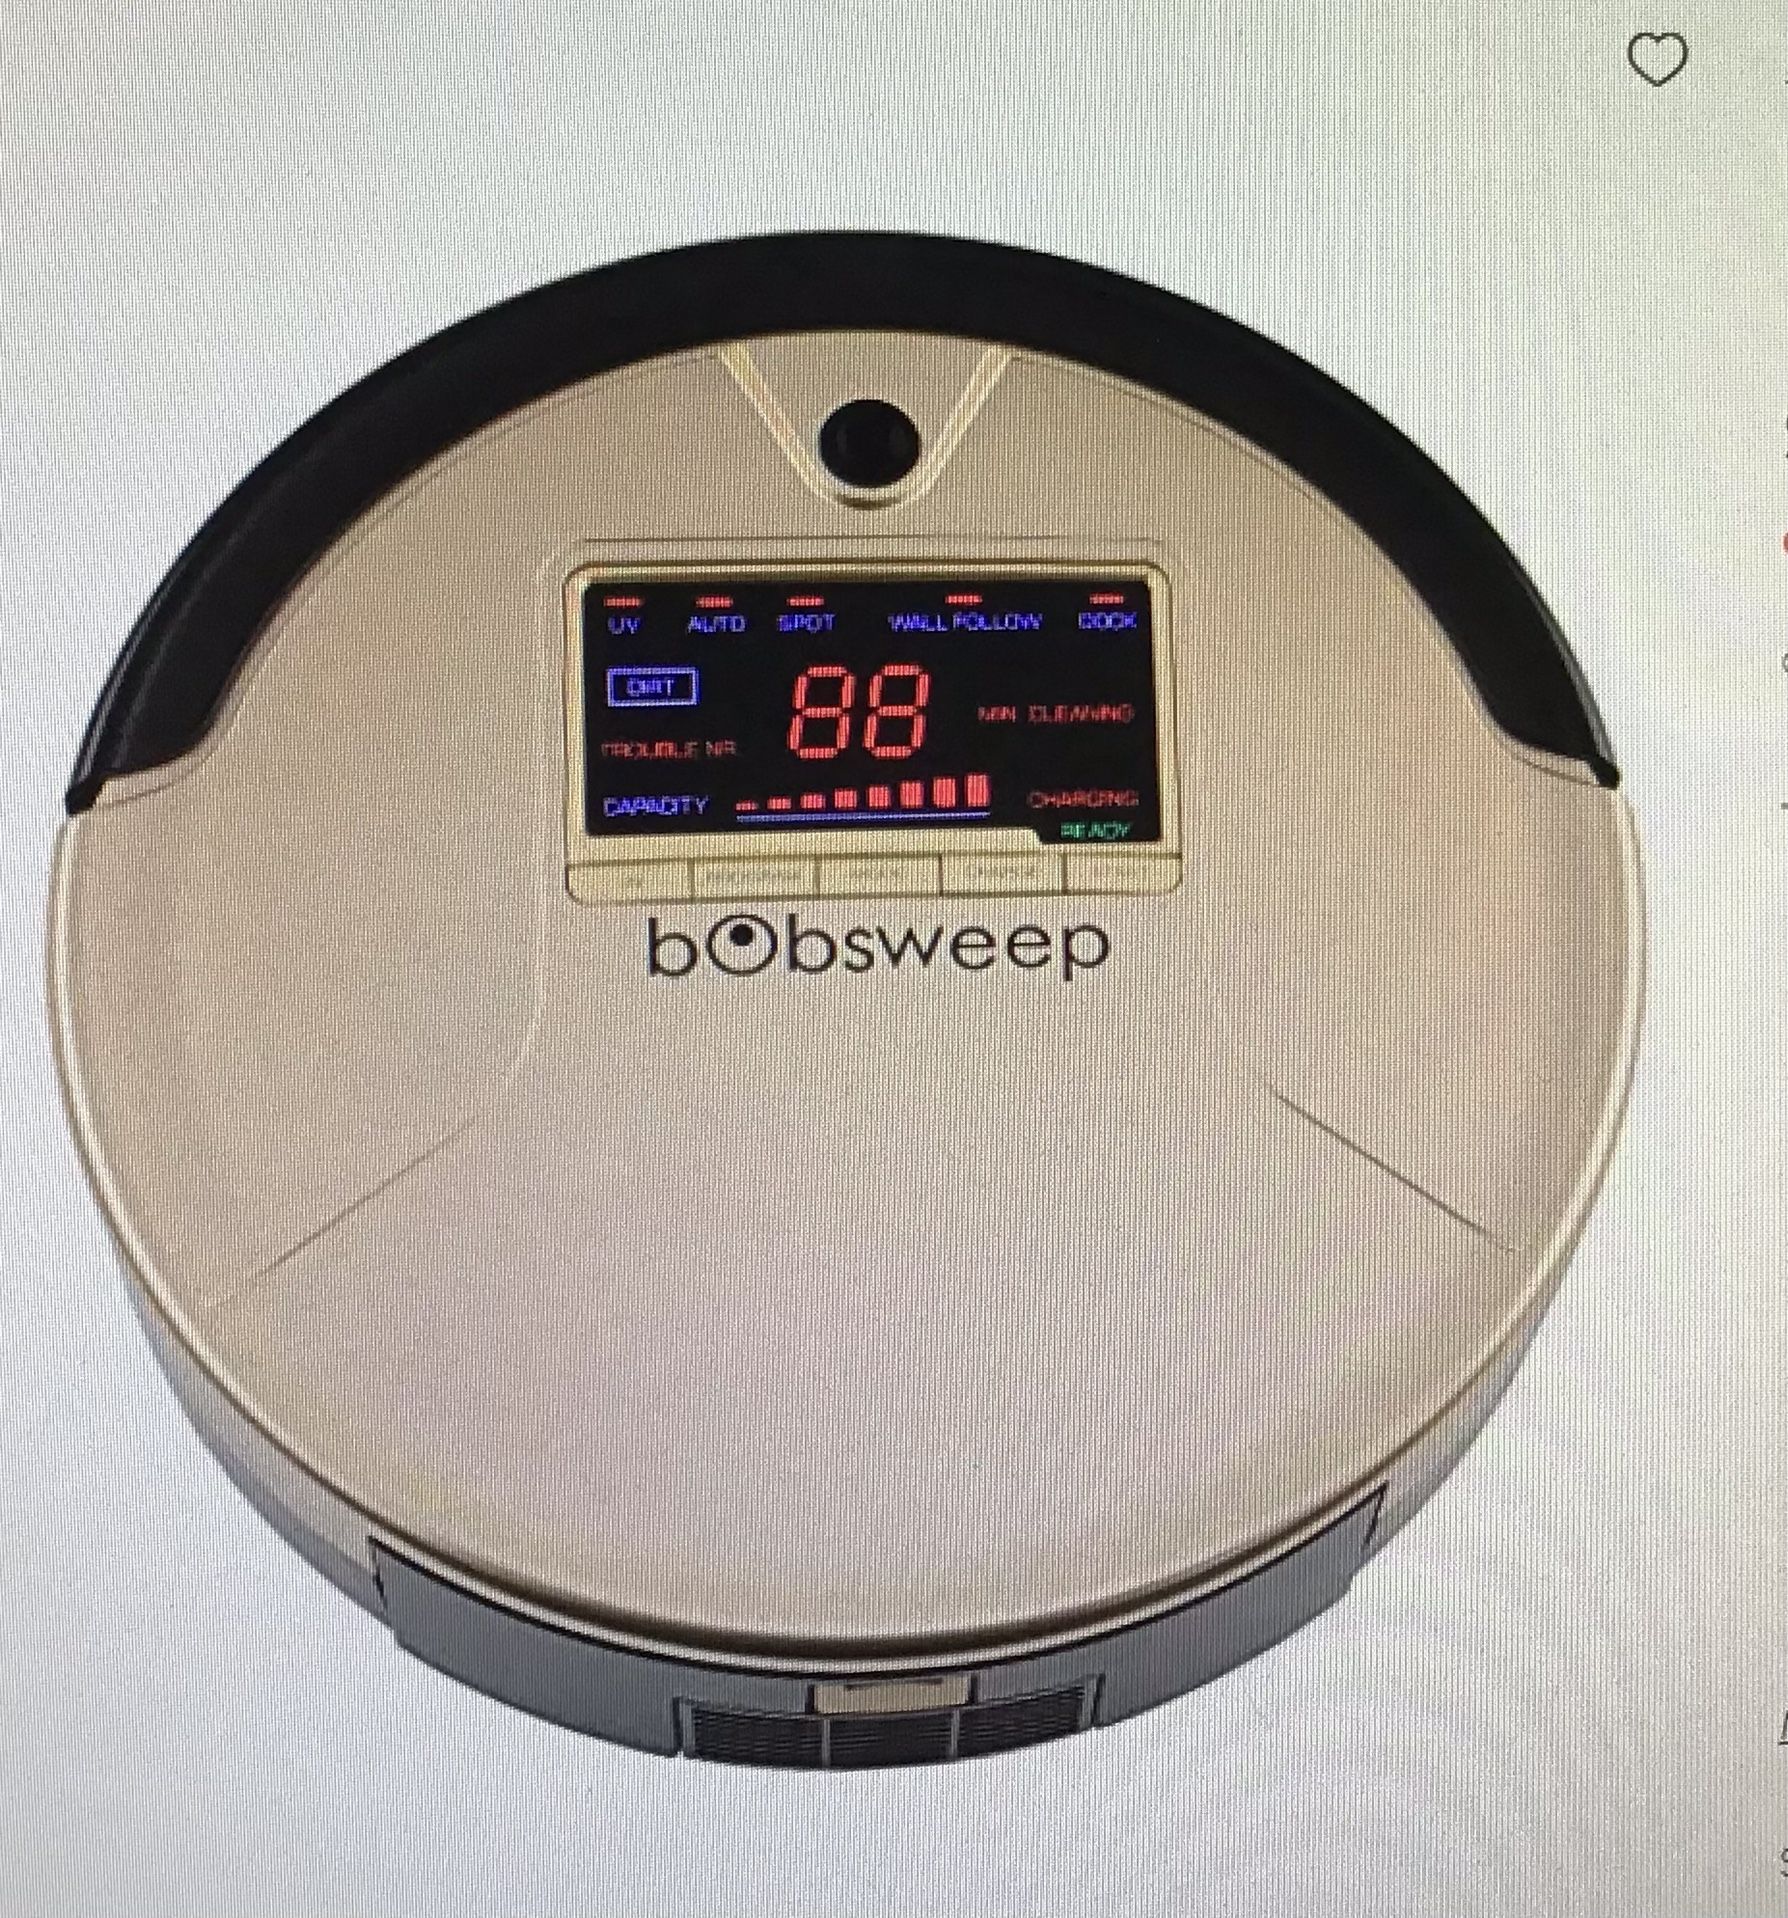 Bobsweep Pet hair Robot Vacuum Cleaner And Mop.